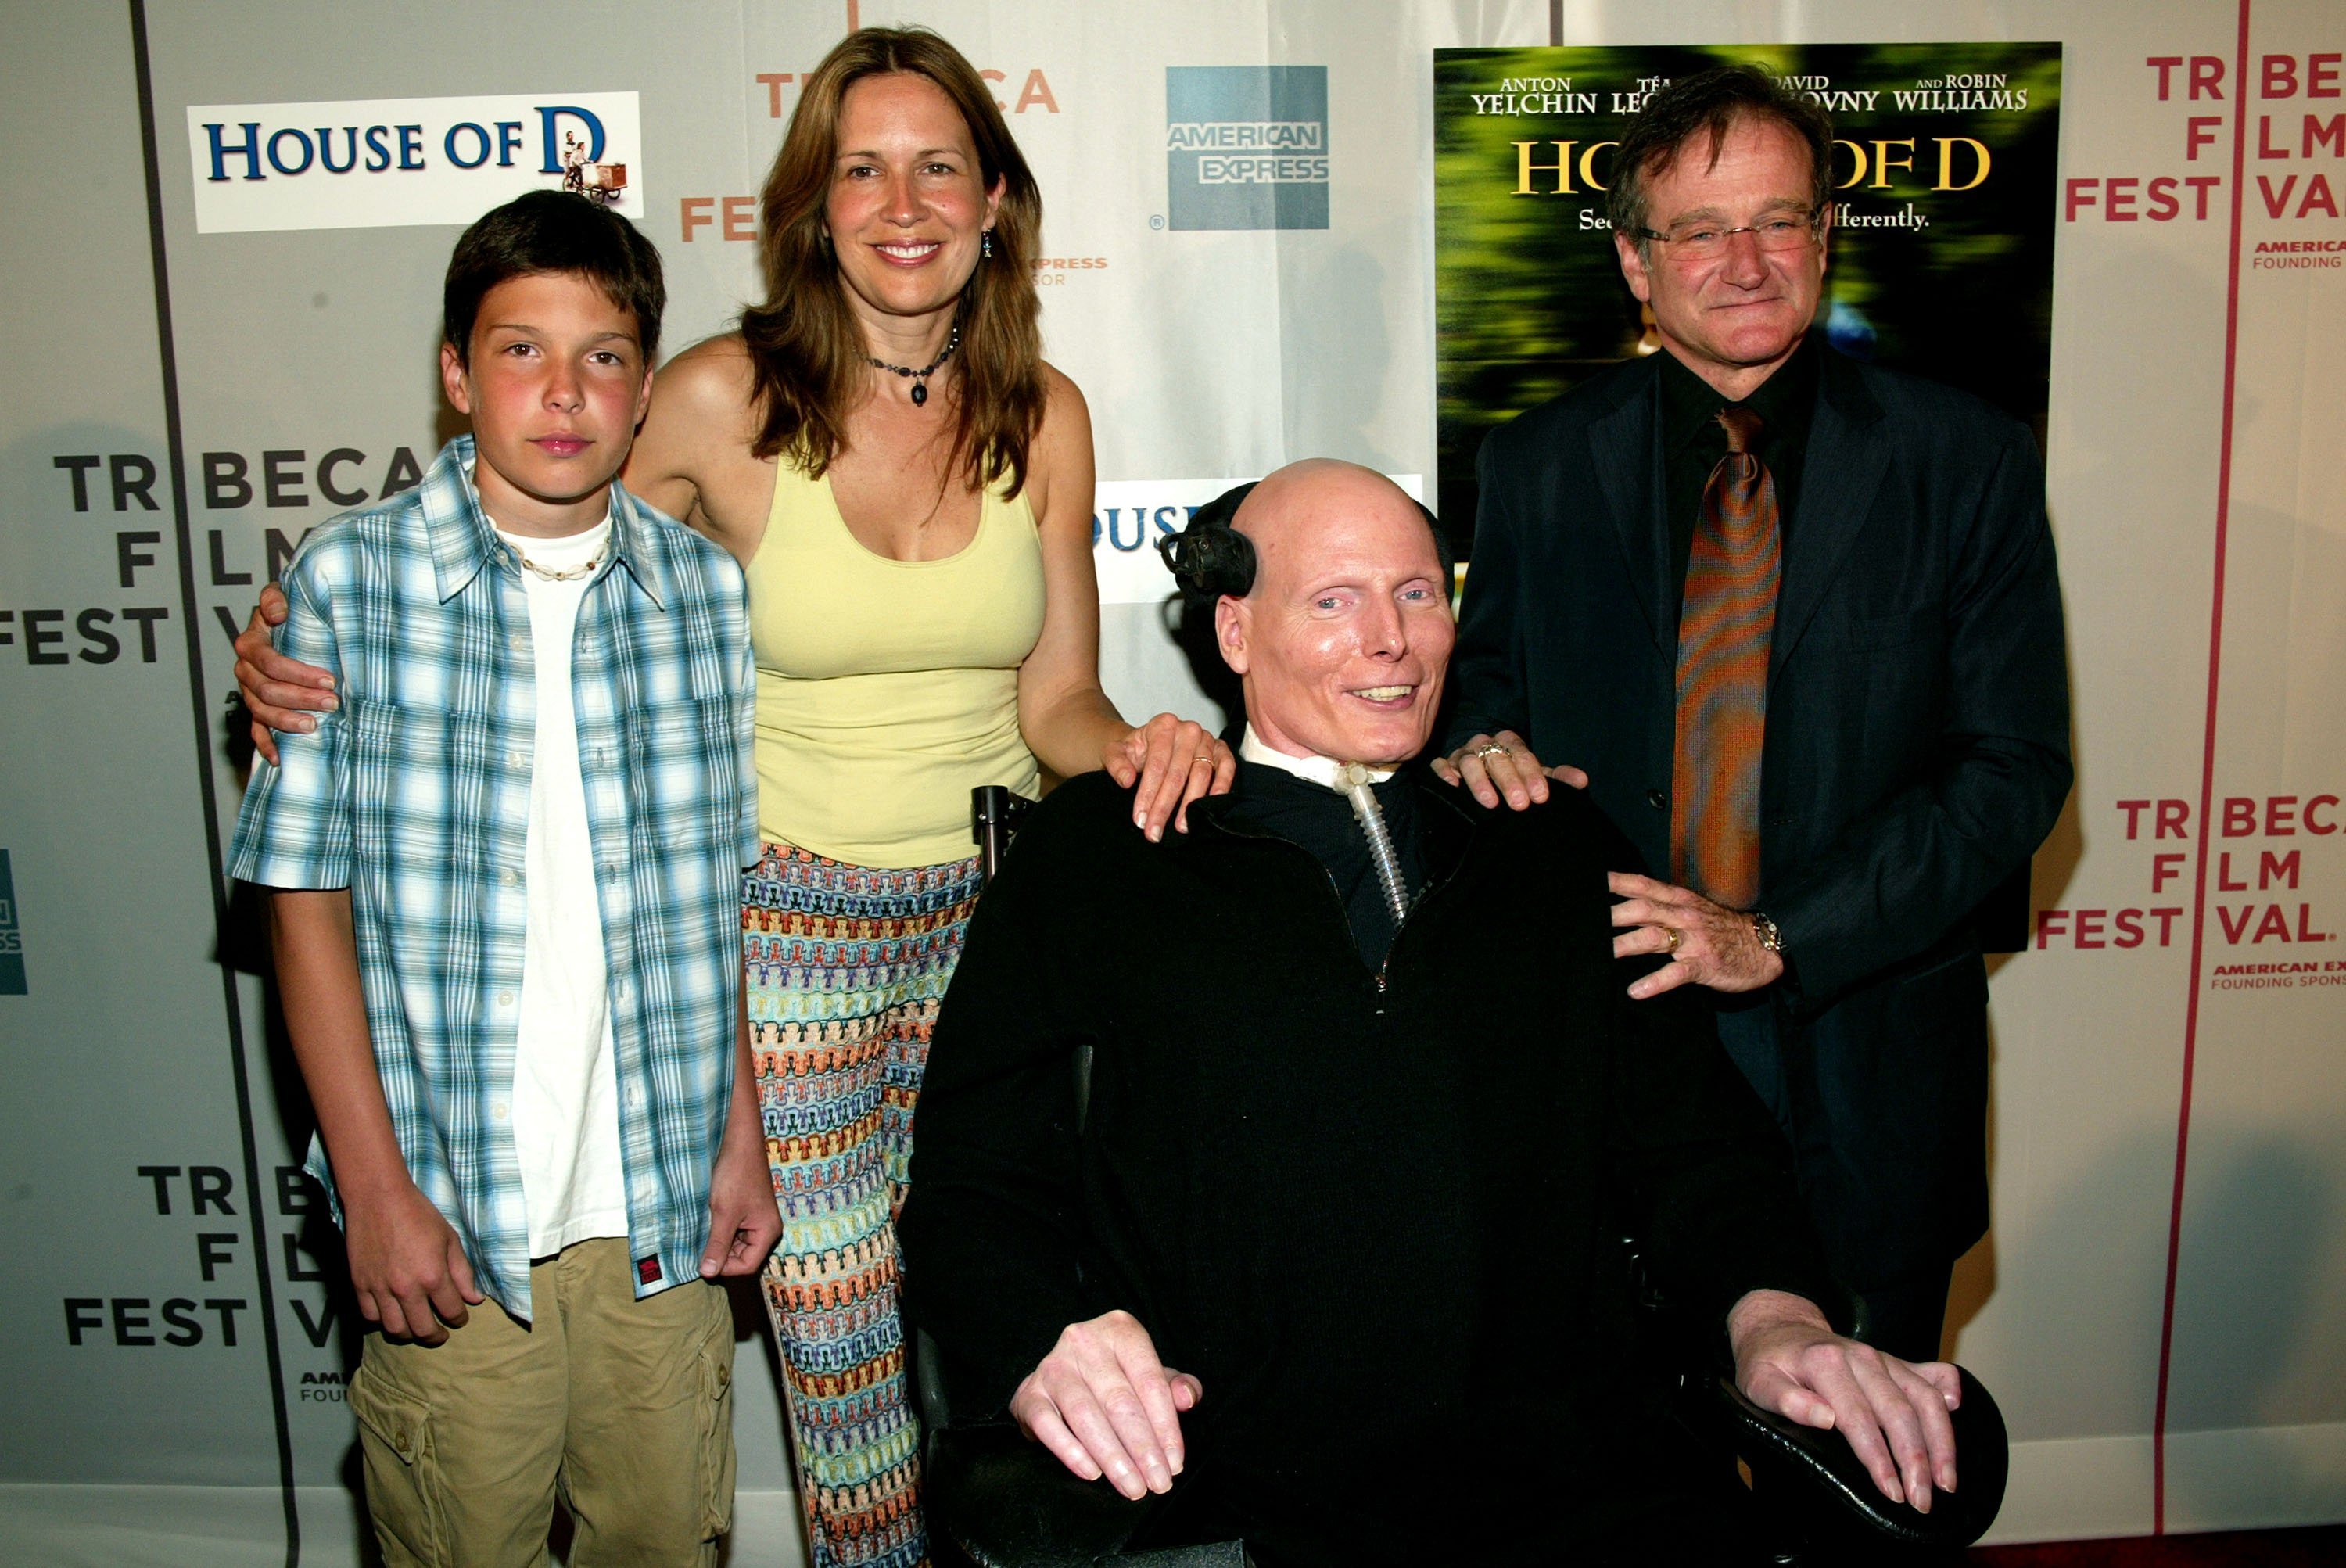 Robin Williams, poses with Christopher Reeve, his wife Dana Reeve and son Will at the 2004 screening of "House of D" in New York City | Photo: Getty Images